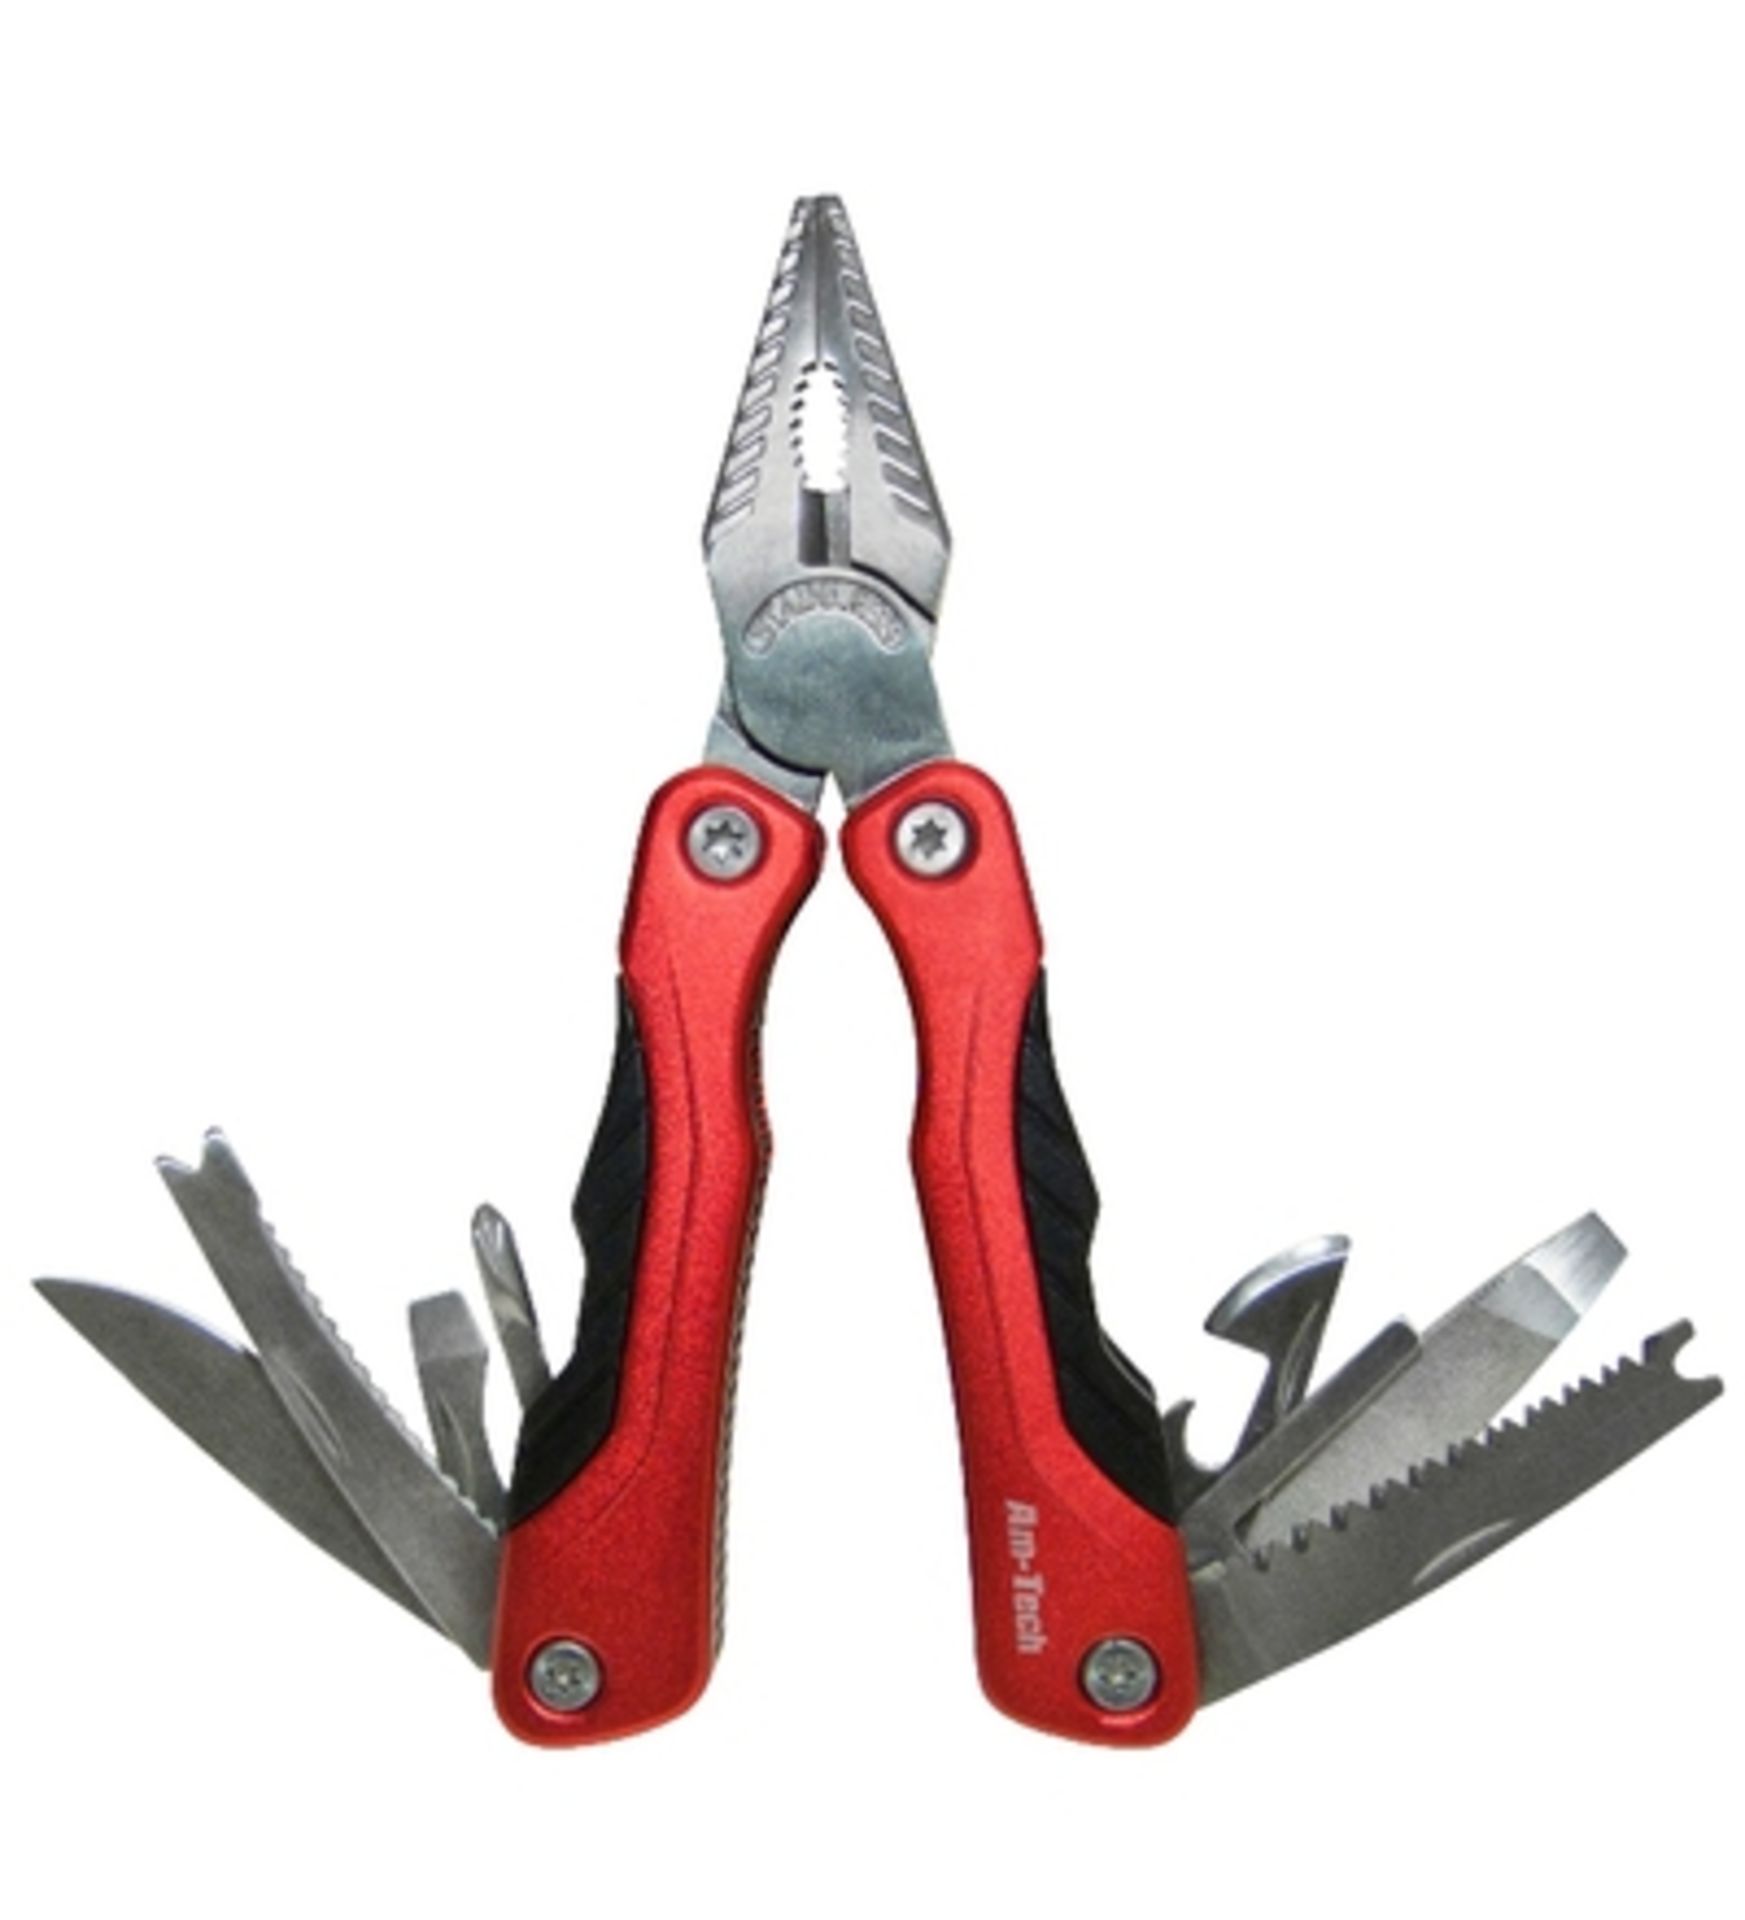 + VAT Brand New 12-In-1 Folding Multi-Function Tool Kit With Storage Pouch - Ideal For Camping/